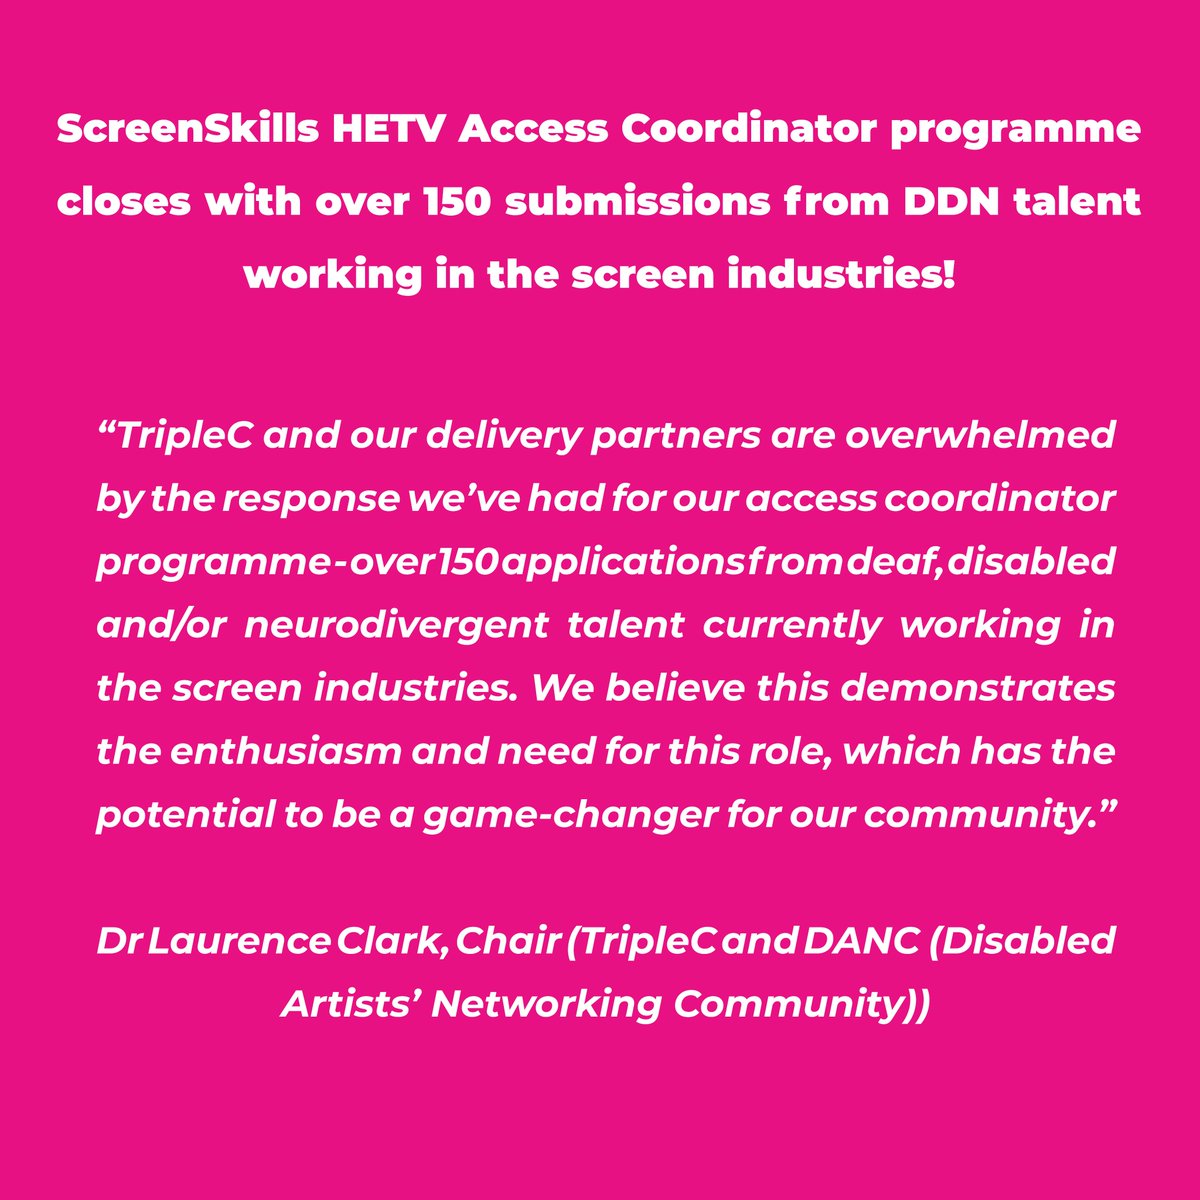 @southbankcentre @sohomediaclub1 We are pleased to announce that our #HETVSkillsFund-ed #AccessCoordinator programme has received over 150 applications from deaf, disabled and/or neurodivergent talent in the industry! The @TripleC_UK programme aims to help productions remove barriers to #access and #inclusion✅